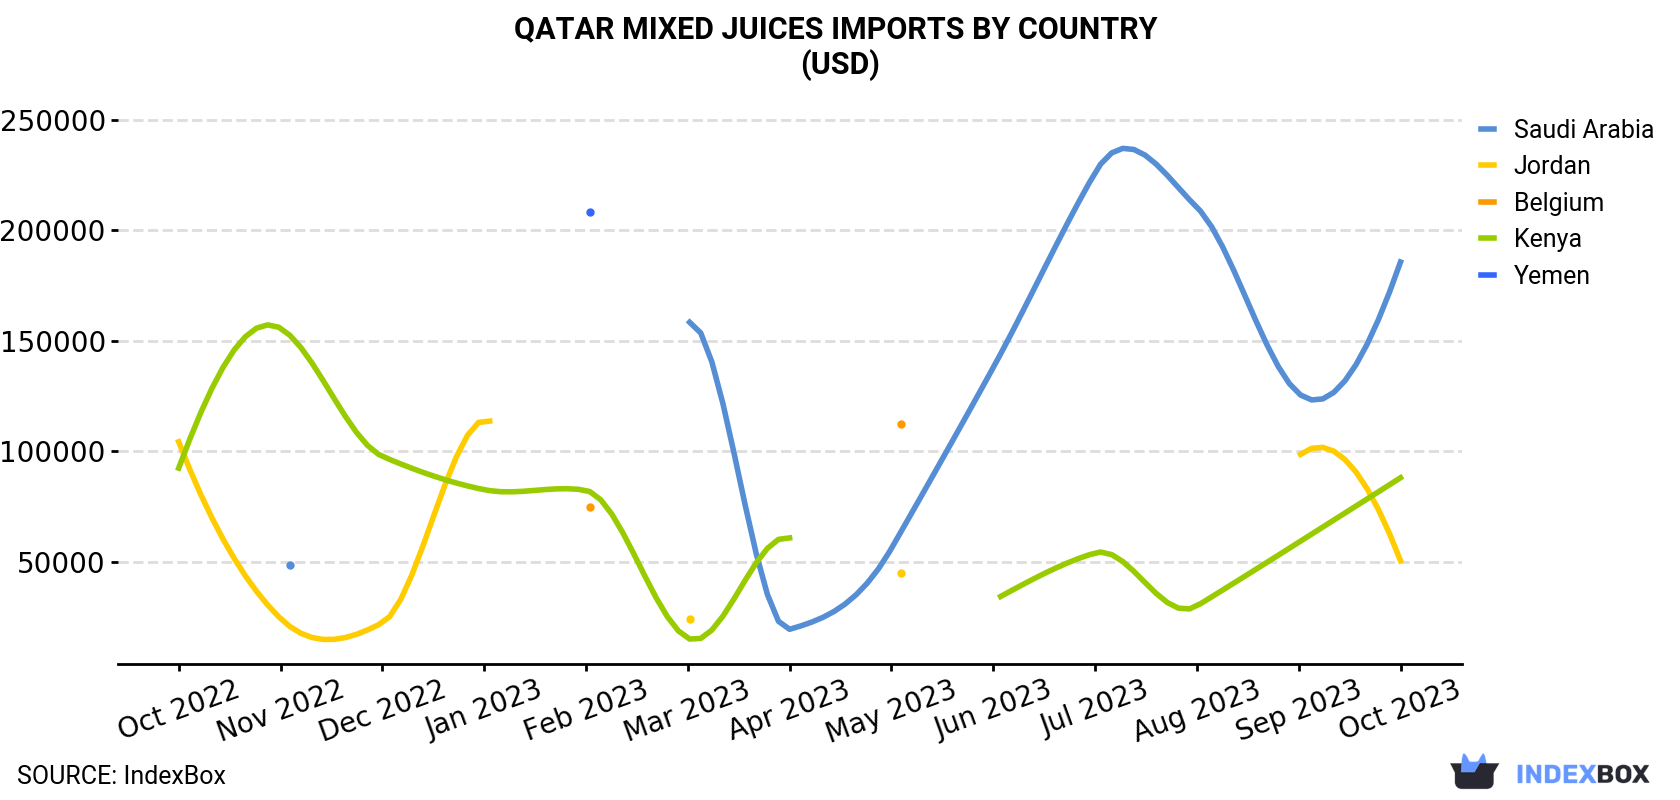 Qatar Mixed Juices Imports By Country (USD)